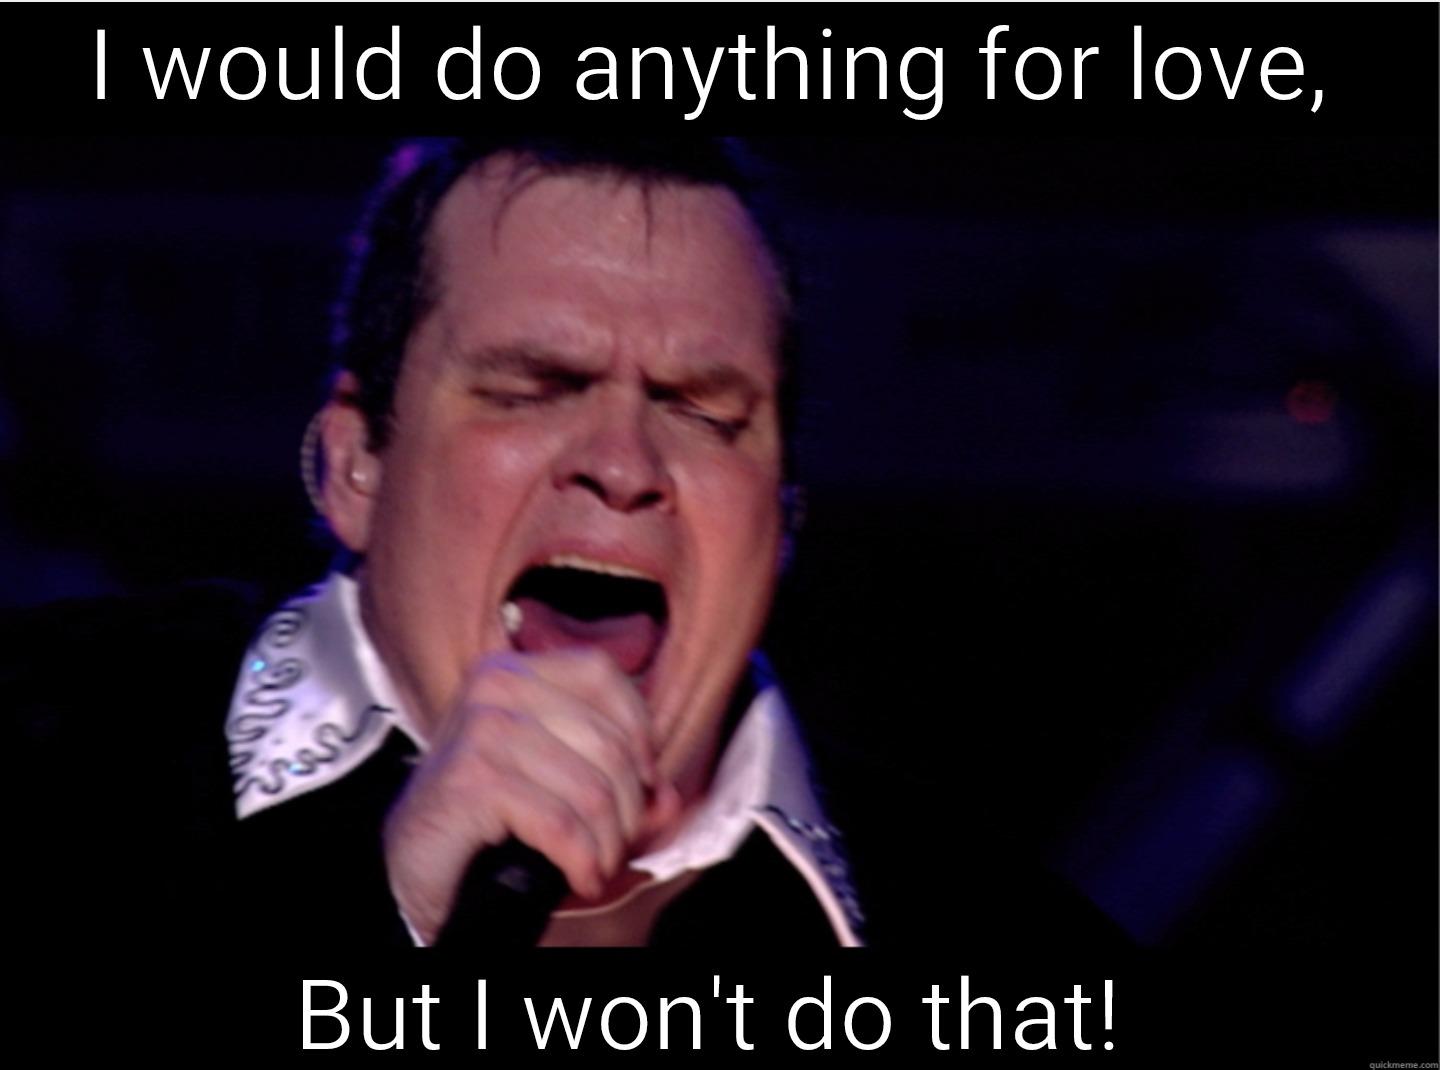 Meatloaf love - I WOULD DO ANYTHING FOR LOVE, BUT I WON'T DO THAT! Misc